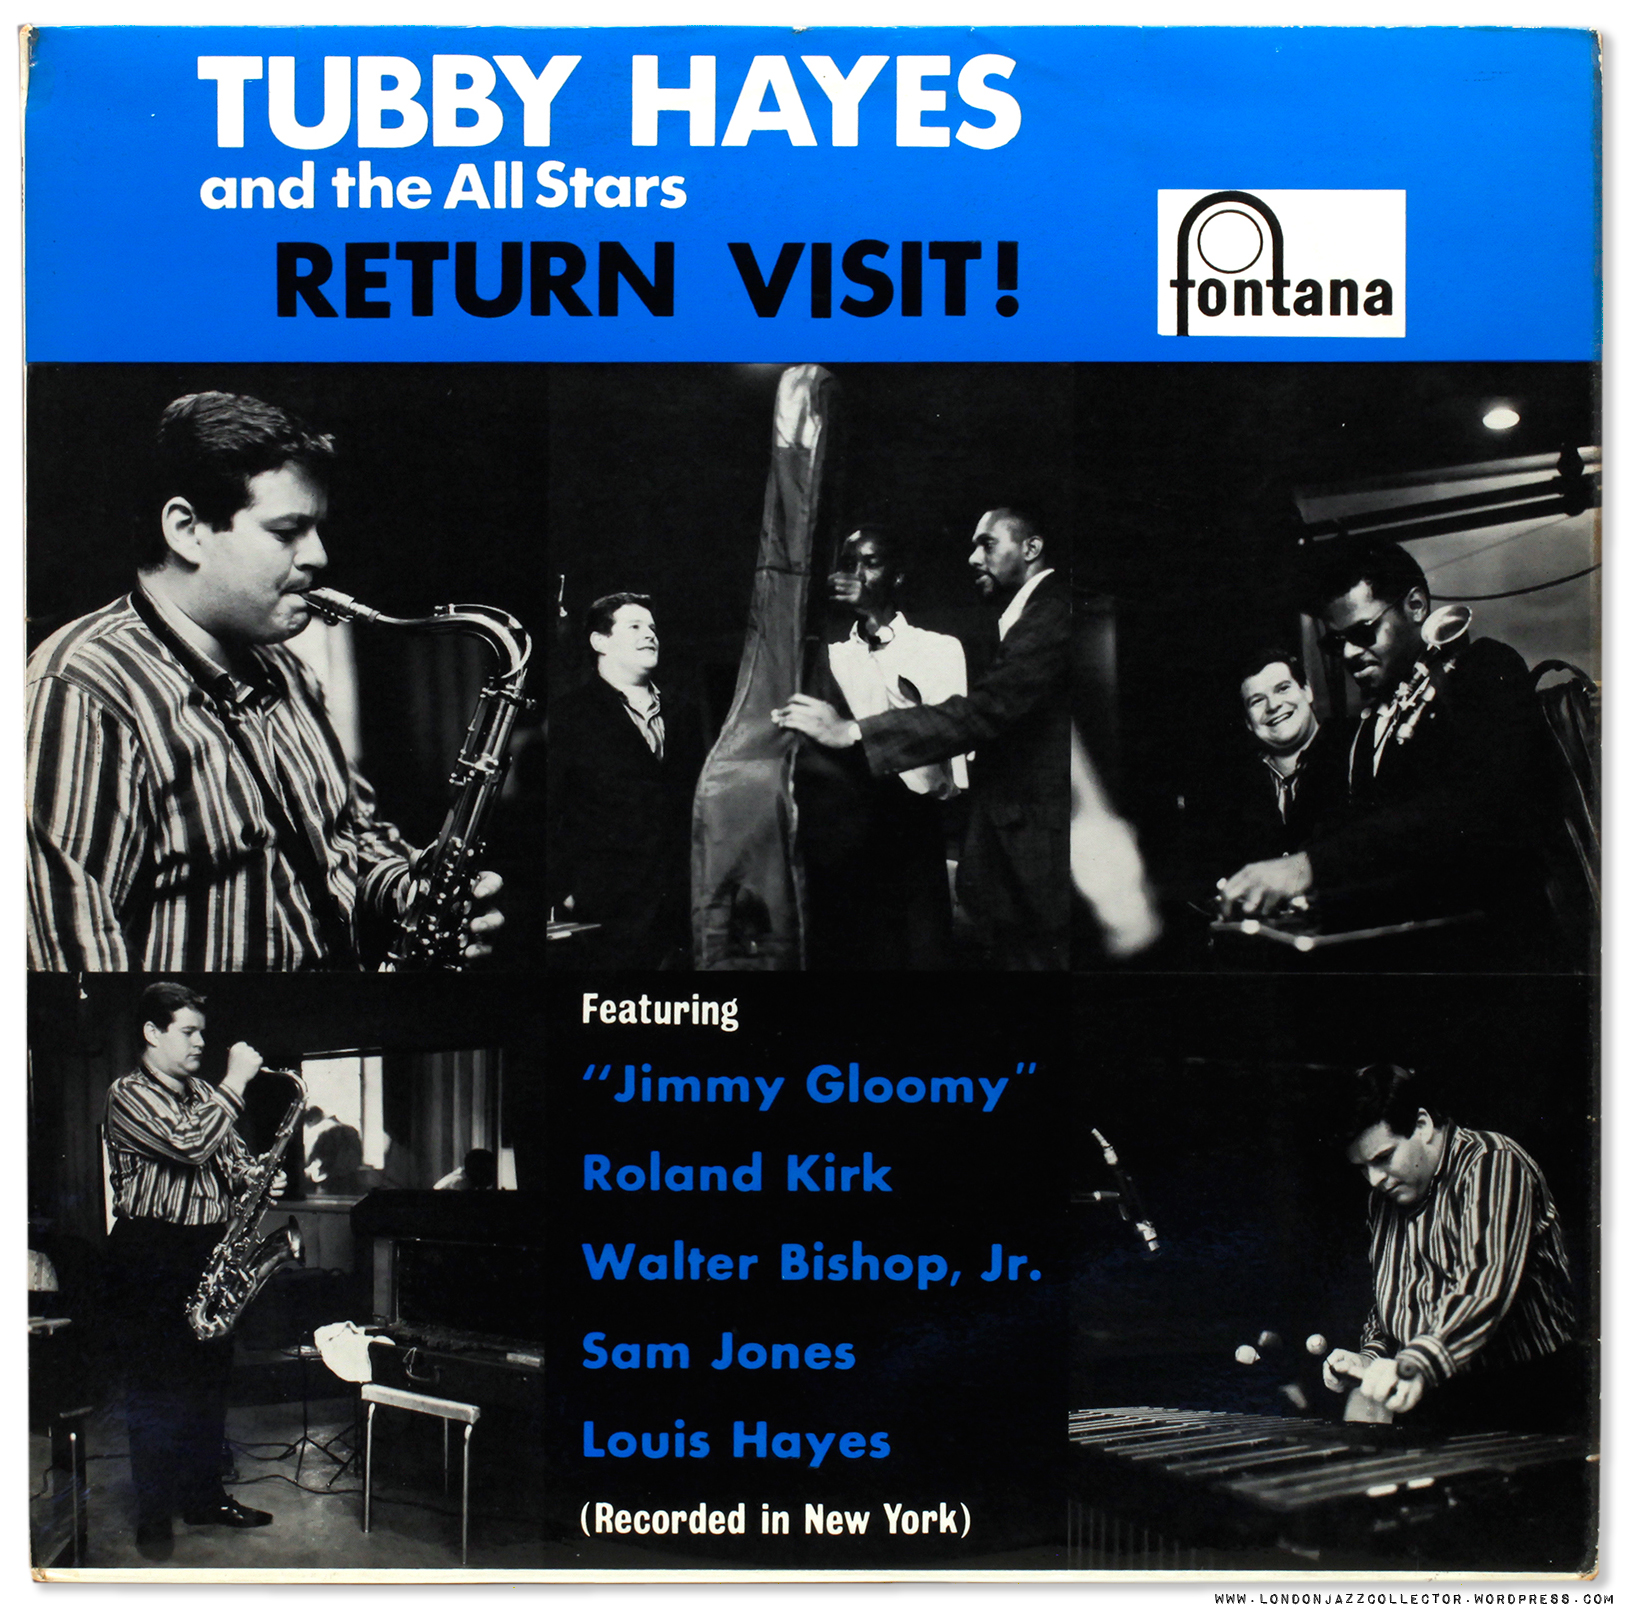 tubby-hayes-return-visit-fontana-front-c